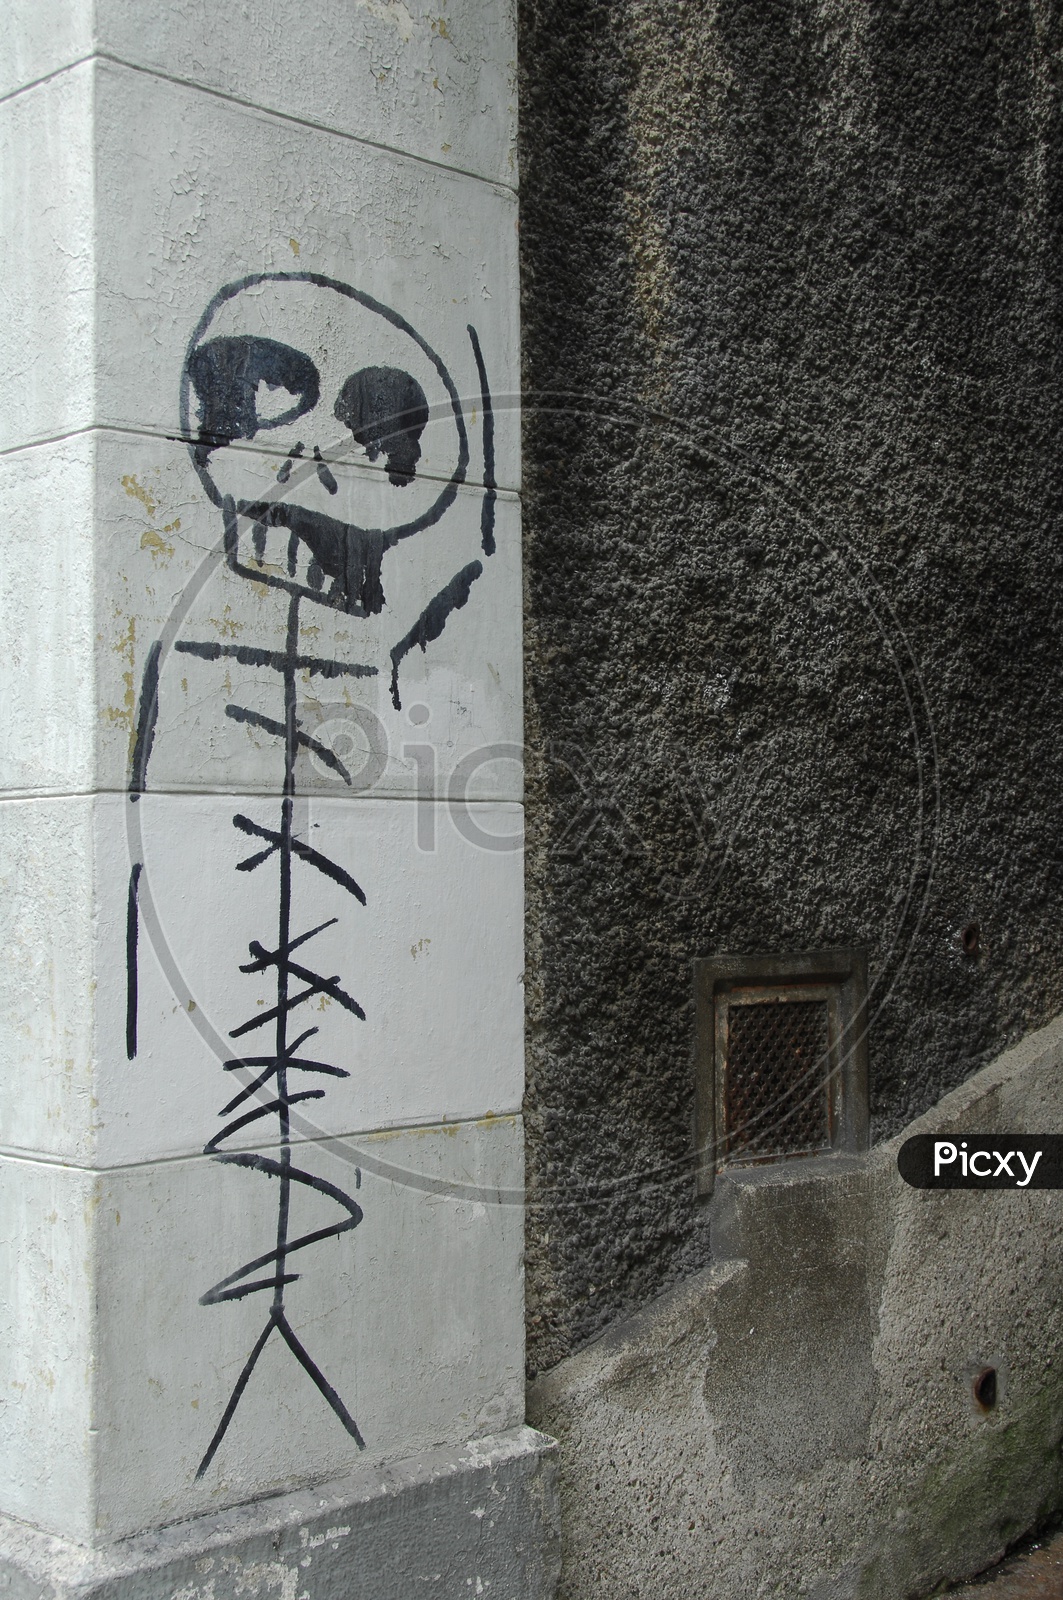 A skull drawing on a wall